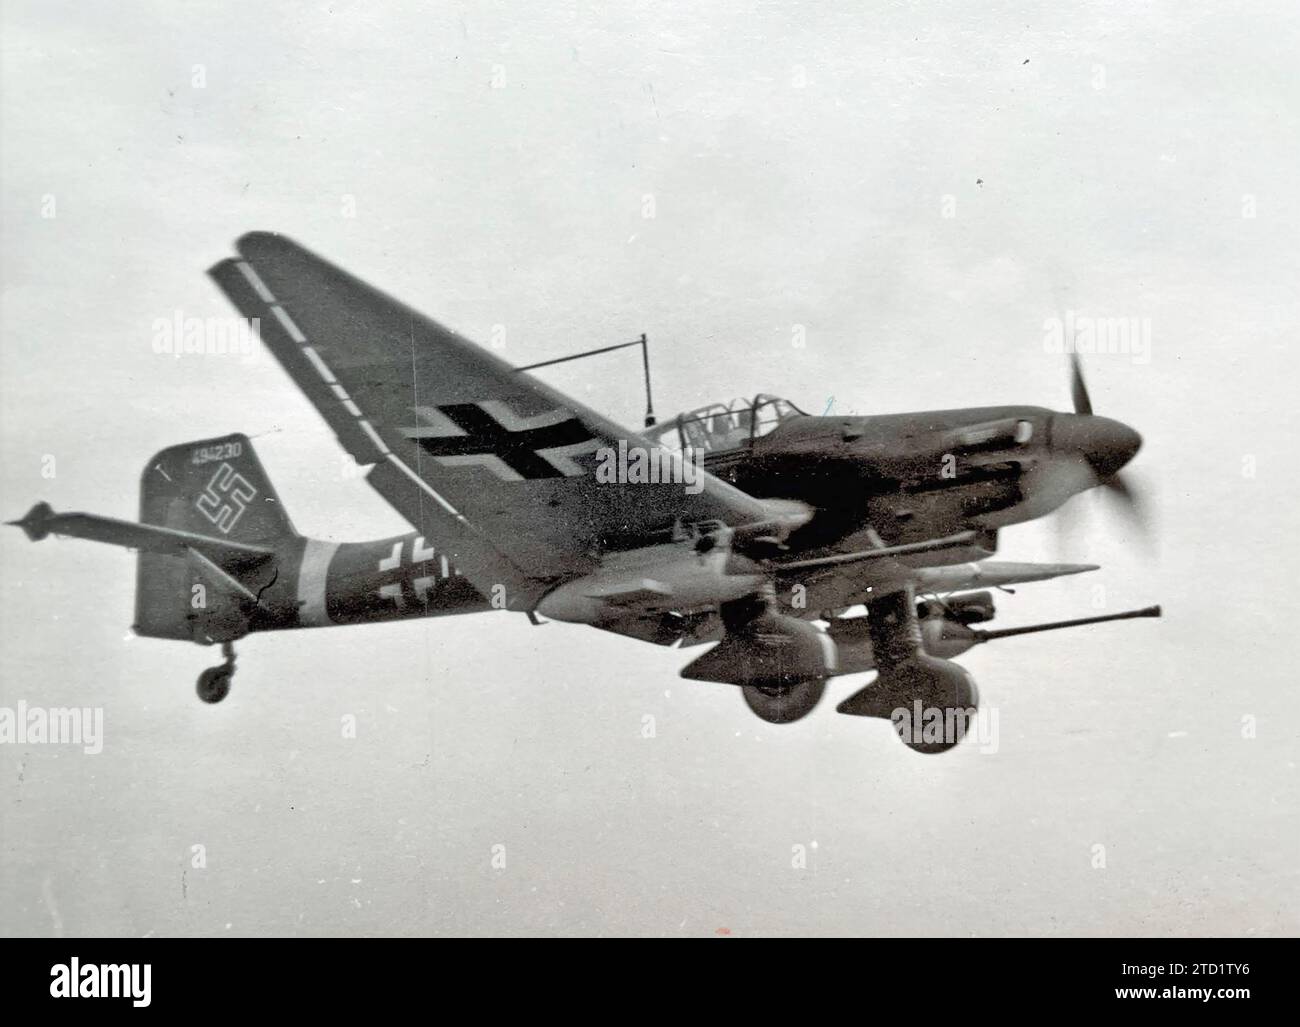 JUNKERS Ju 87 G-1  'kanonenvogel' fitted with twin  Bordkanone 3.7 cm underwing guns Stock Photo